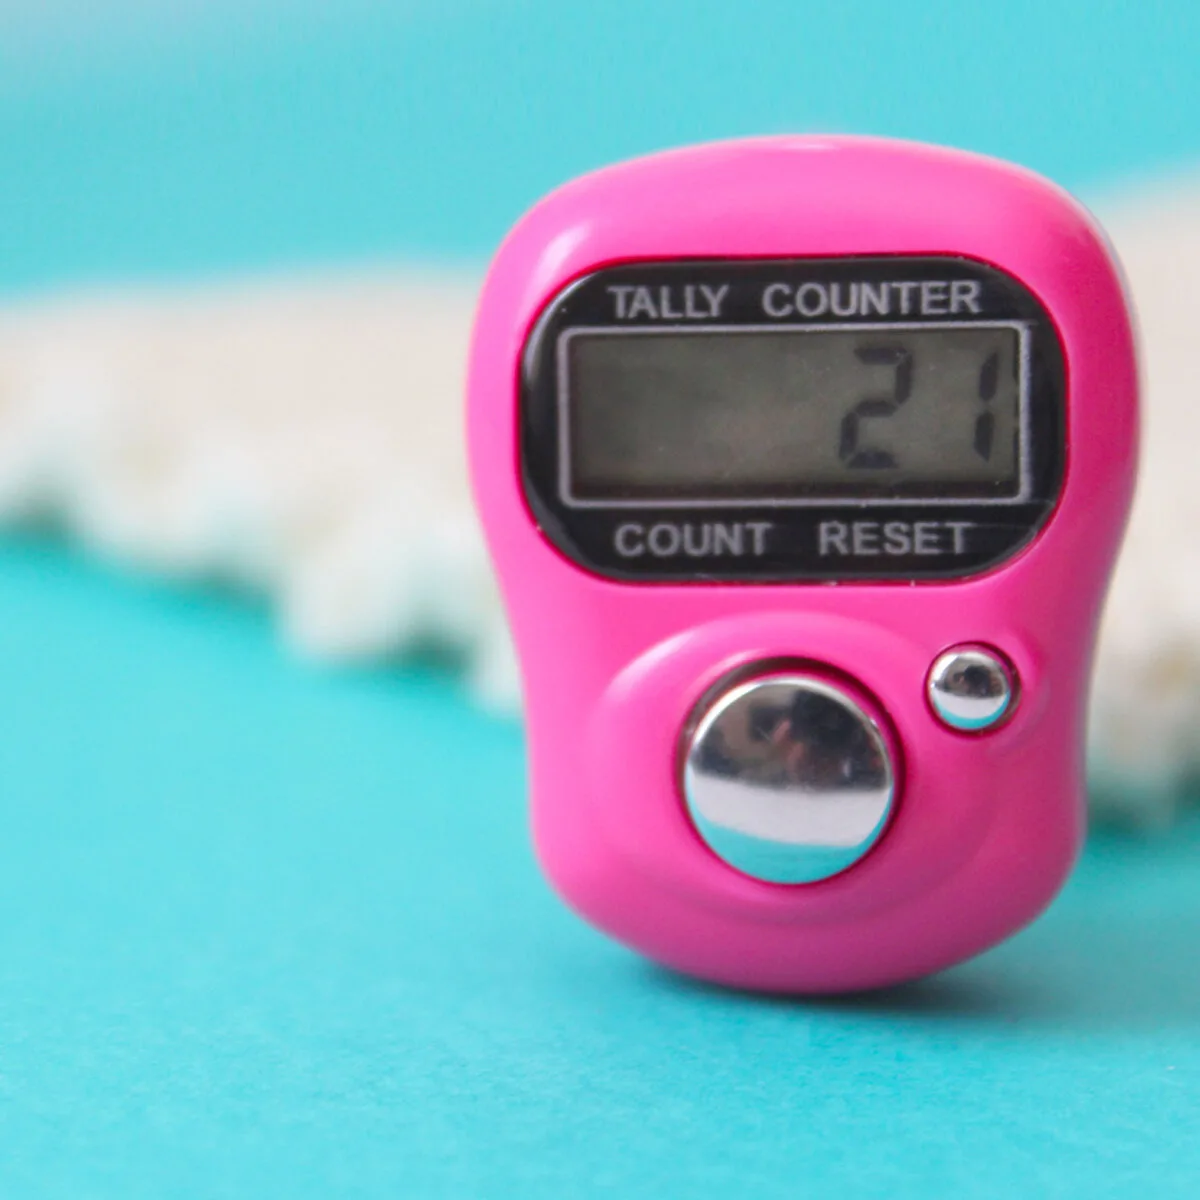 Digital Row Counter in hot pink on blue background for knitting stitches